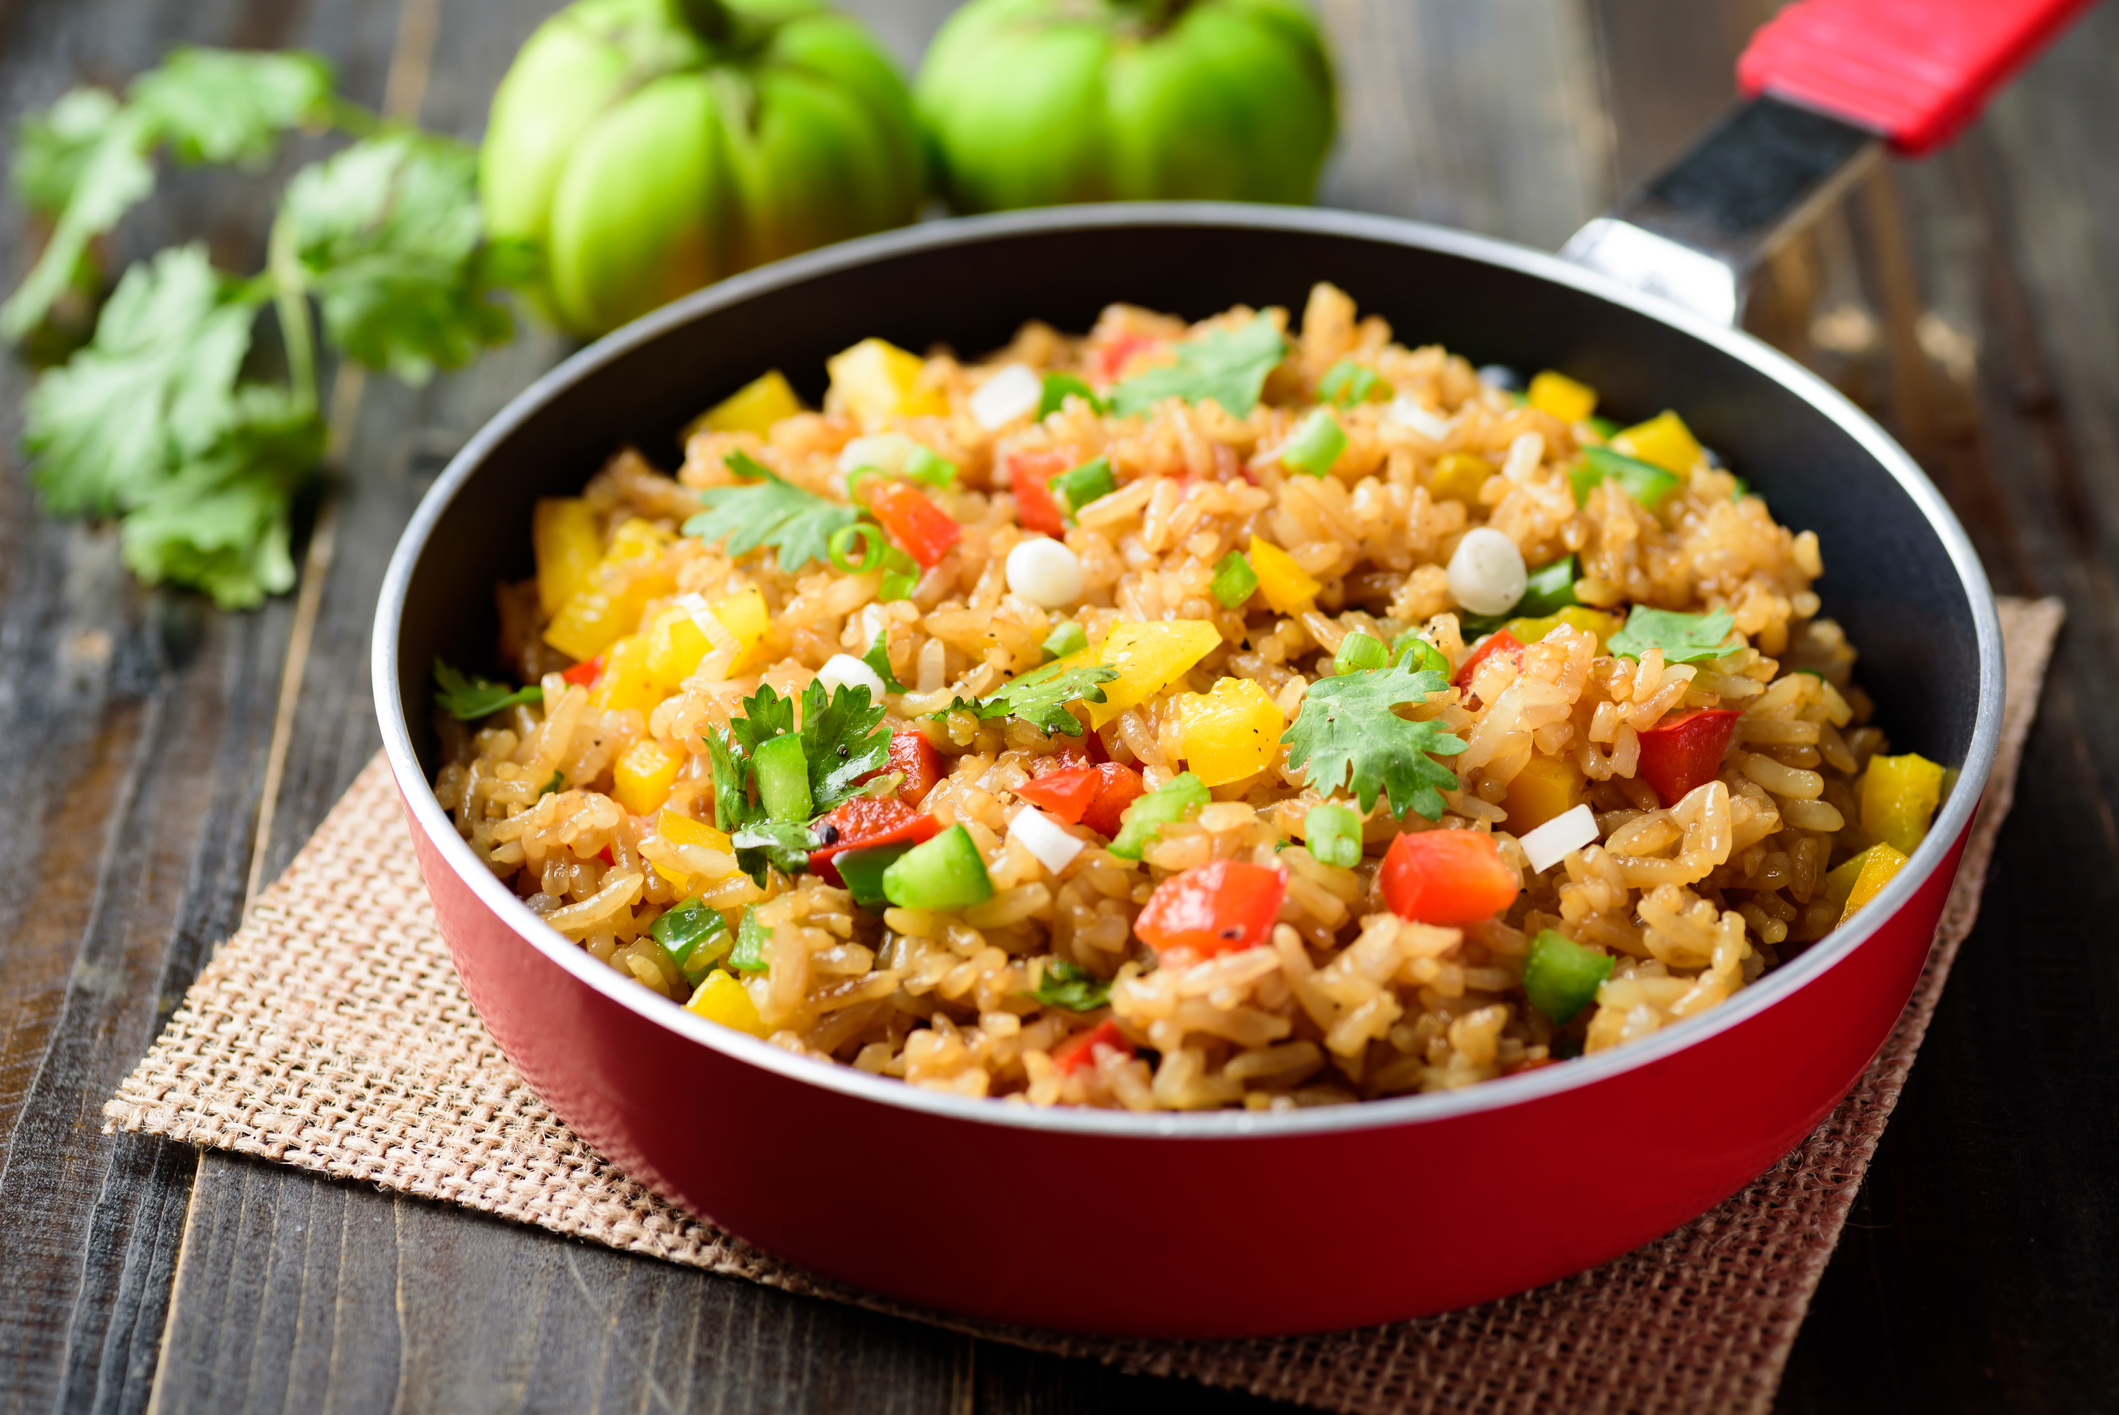 Fried rice with vegetables in cooking pan on wooden background, Asian food